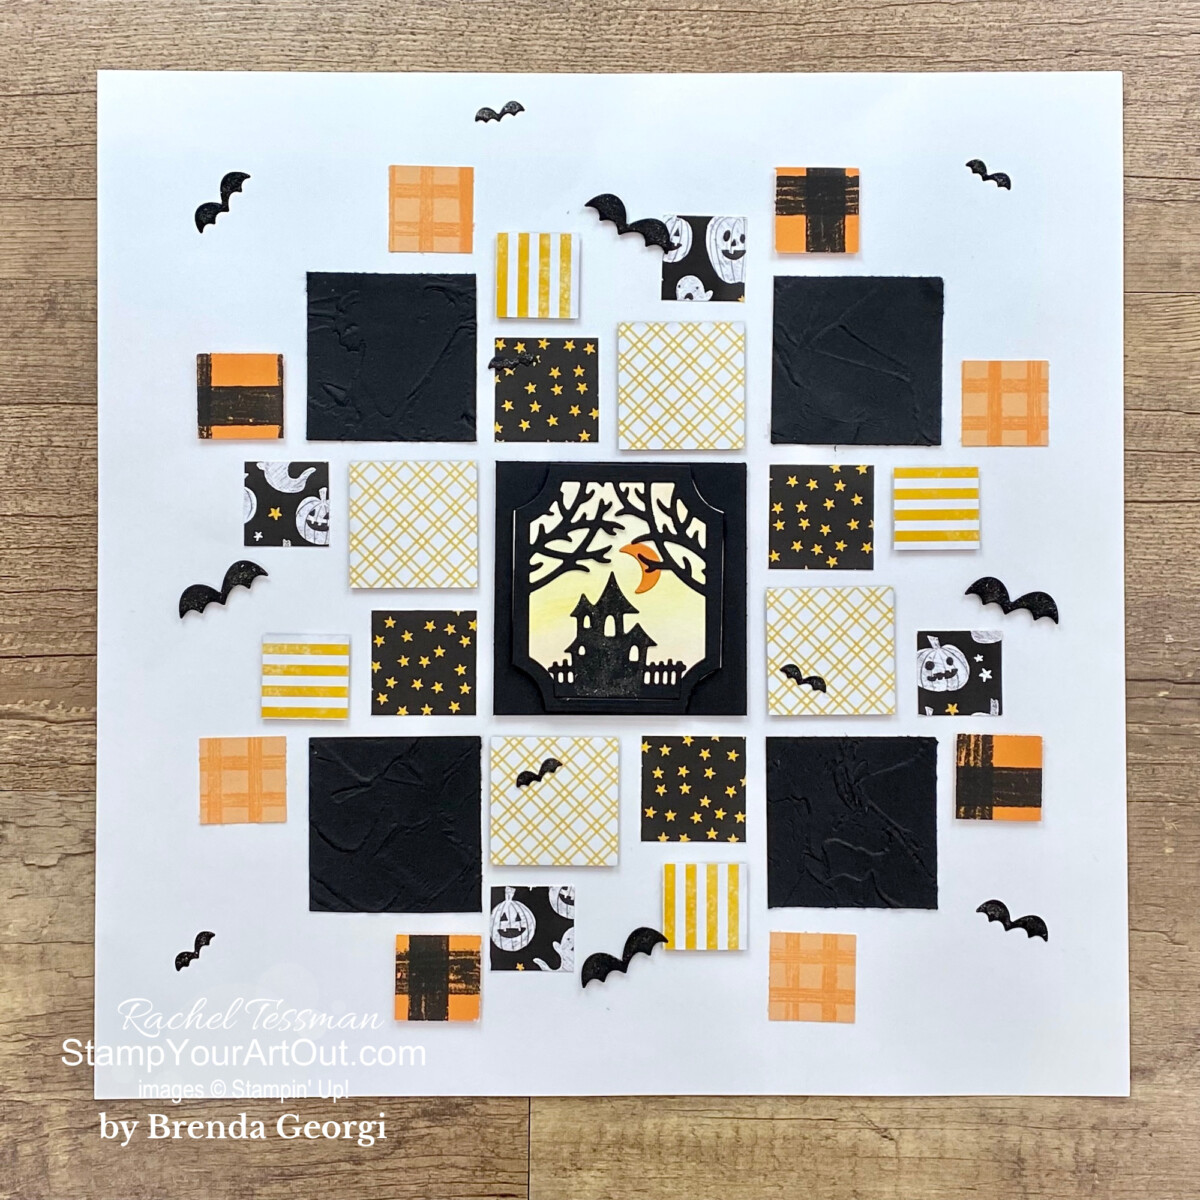 Our Stampers With ART Showcase Stamper for the month of August 2022 created some fun projects with the Halloween products from Stampin’ Up!’s July-Dec 2022 Mini Catalog. Visit to see all these creations from Brenda Georgi. - Stampin’ Up!® - Stamp Your Art Out! www.stampyourartout.com